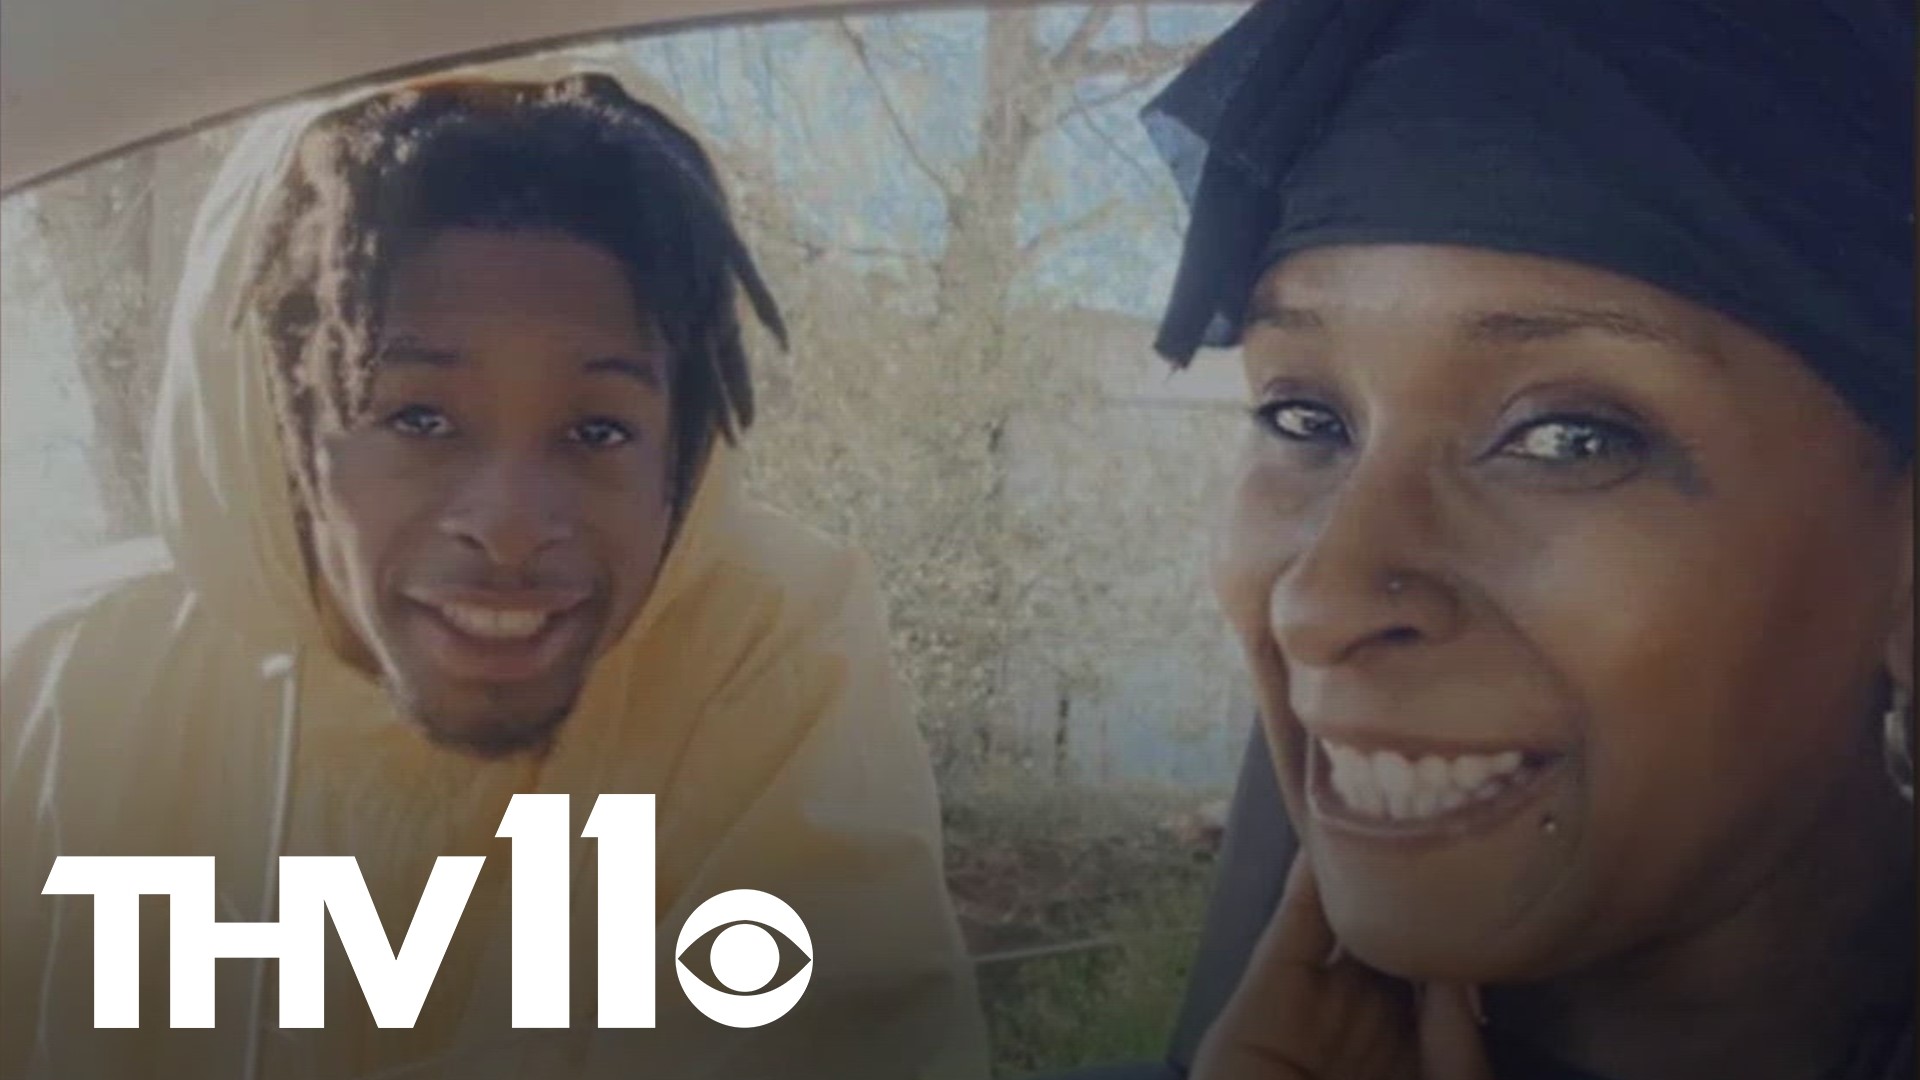 After disappearing almost in Hot Springs almost two weeks ago, the family of Amir Ellis continues searching for answers to what has happened.